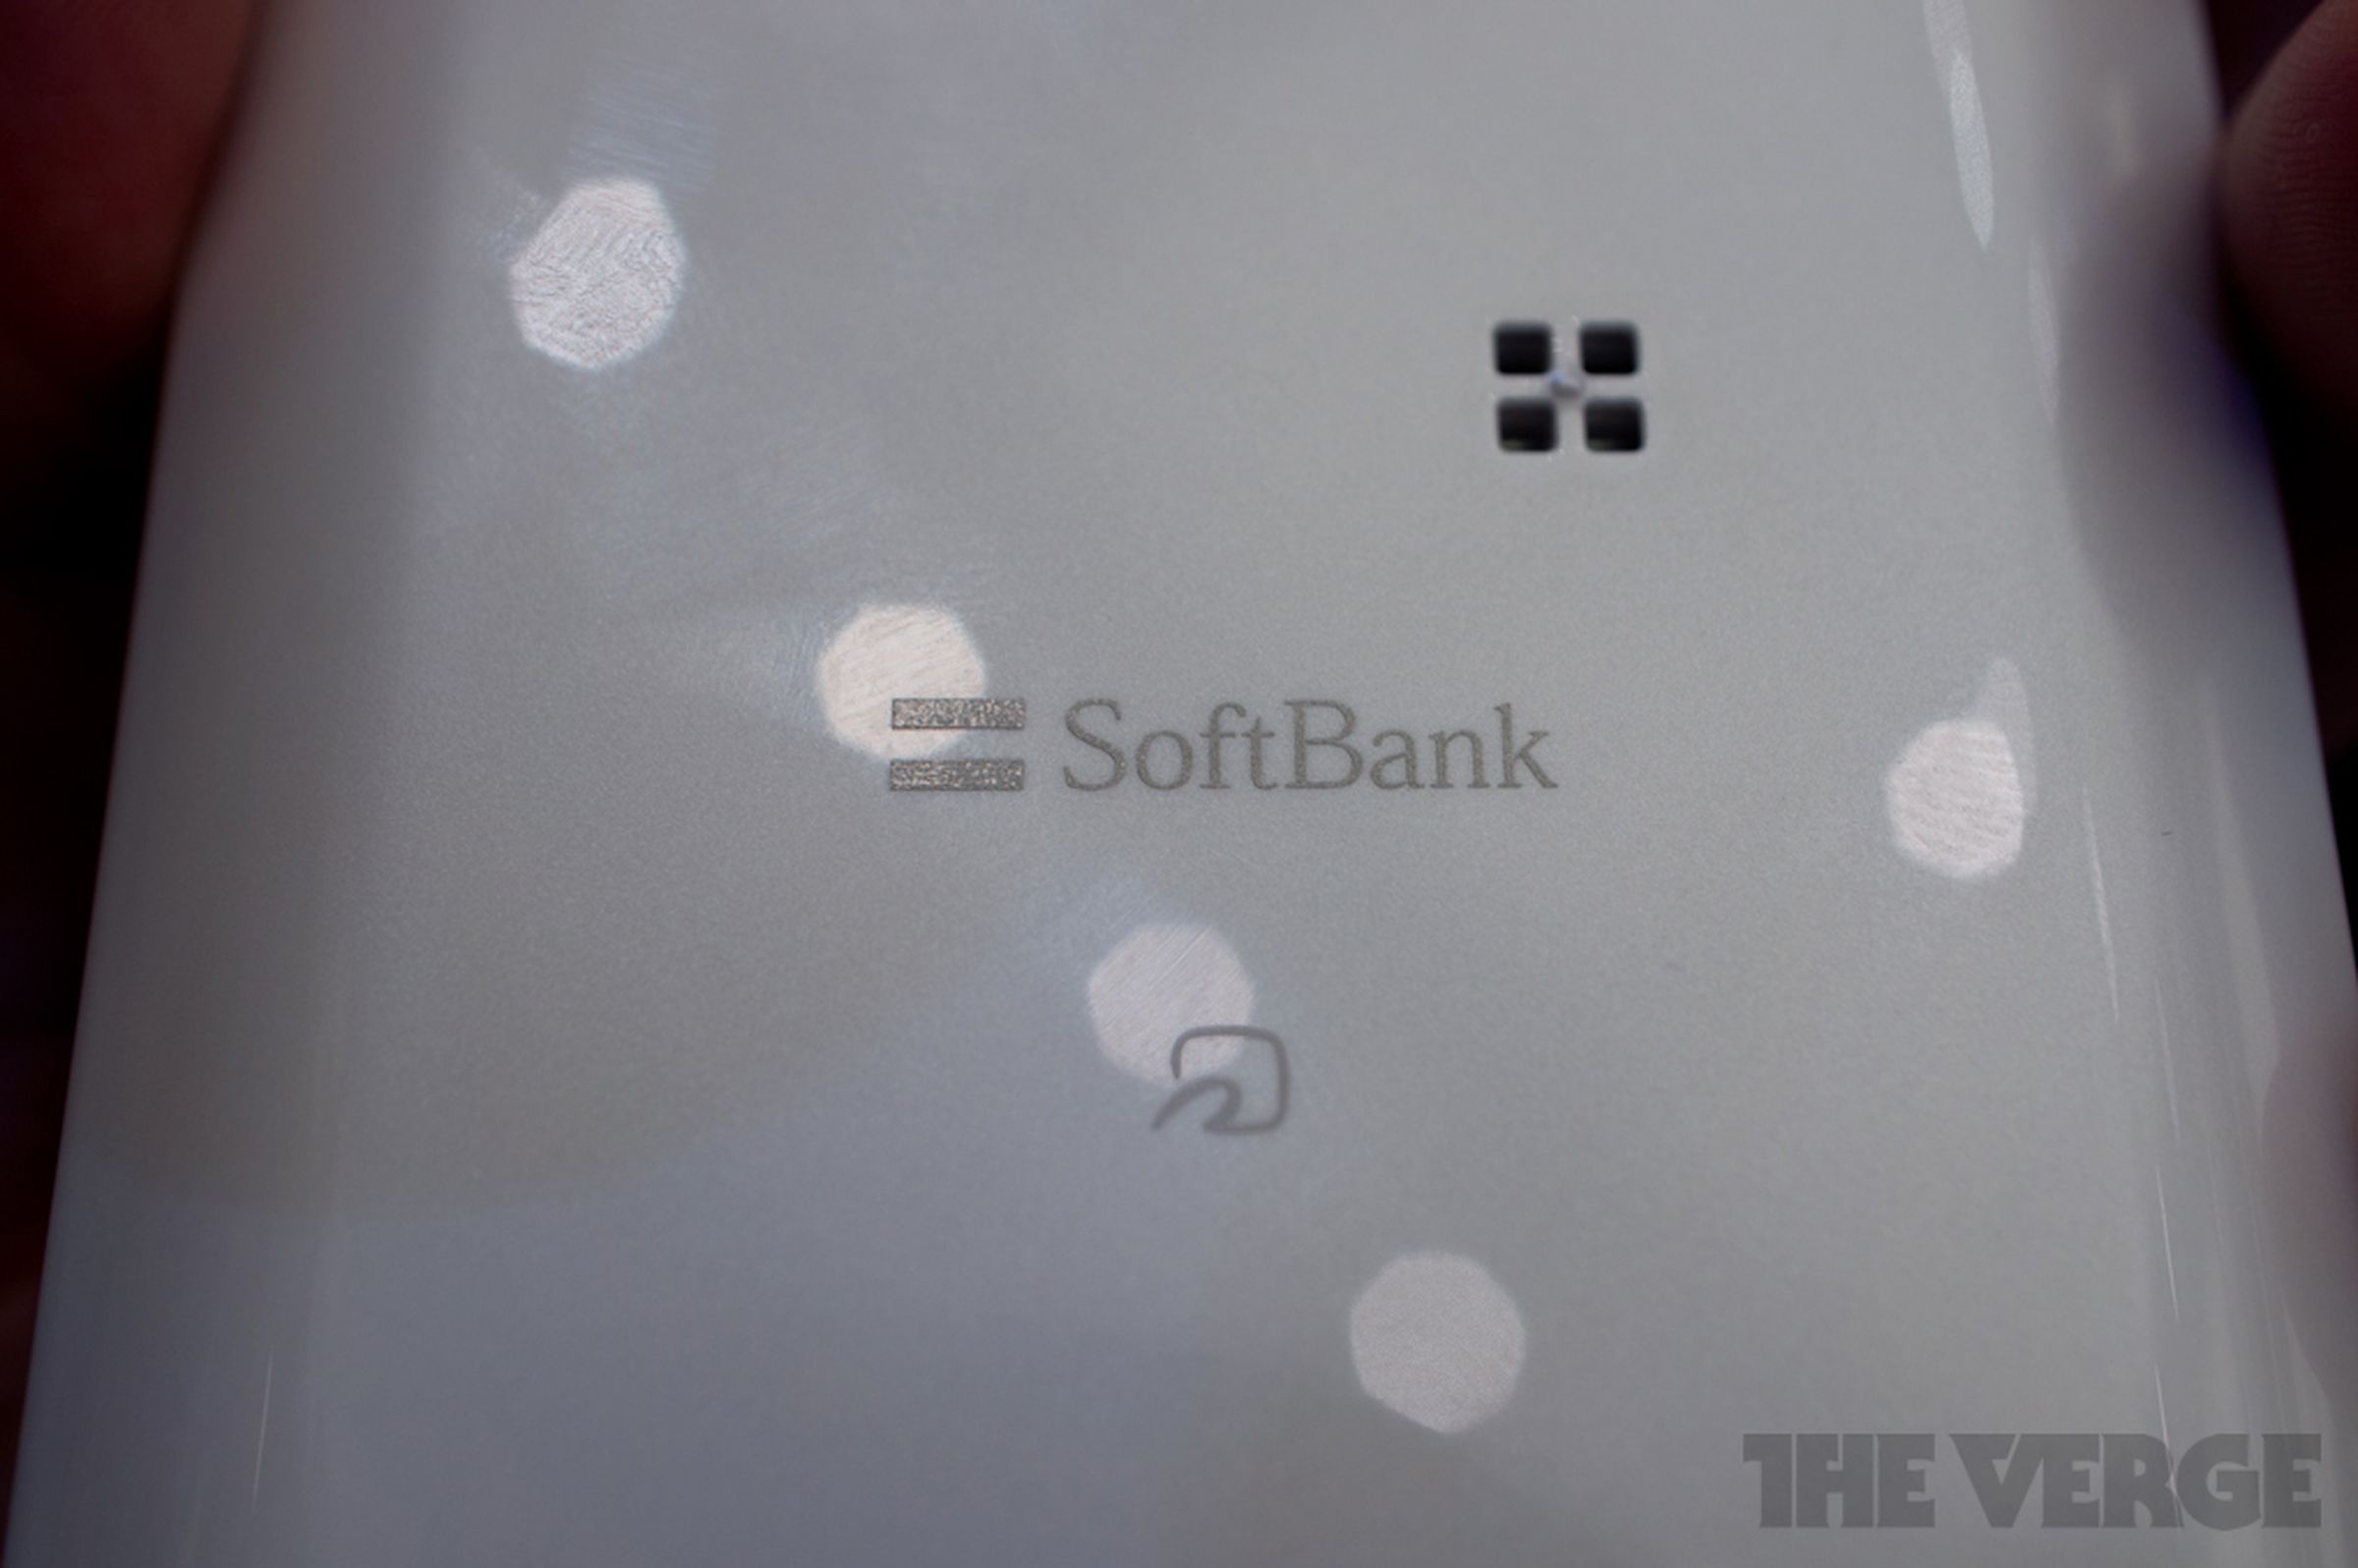 SoftBank's summer 2012 Android lineup